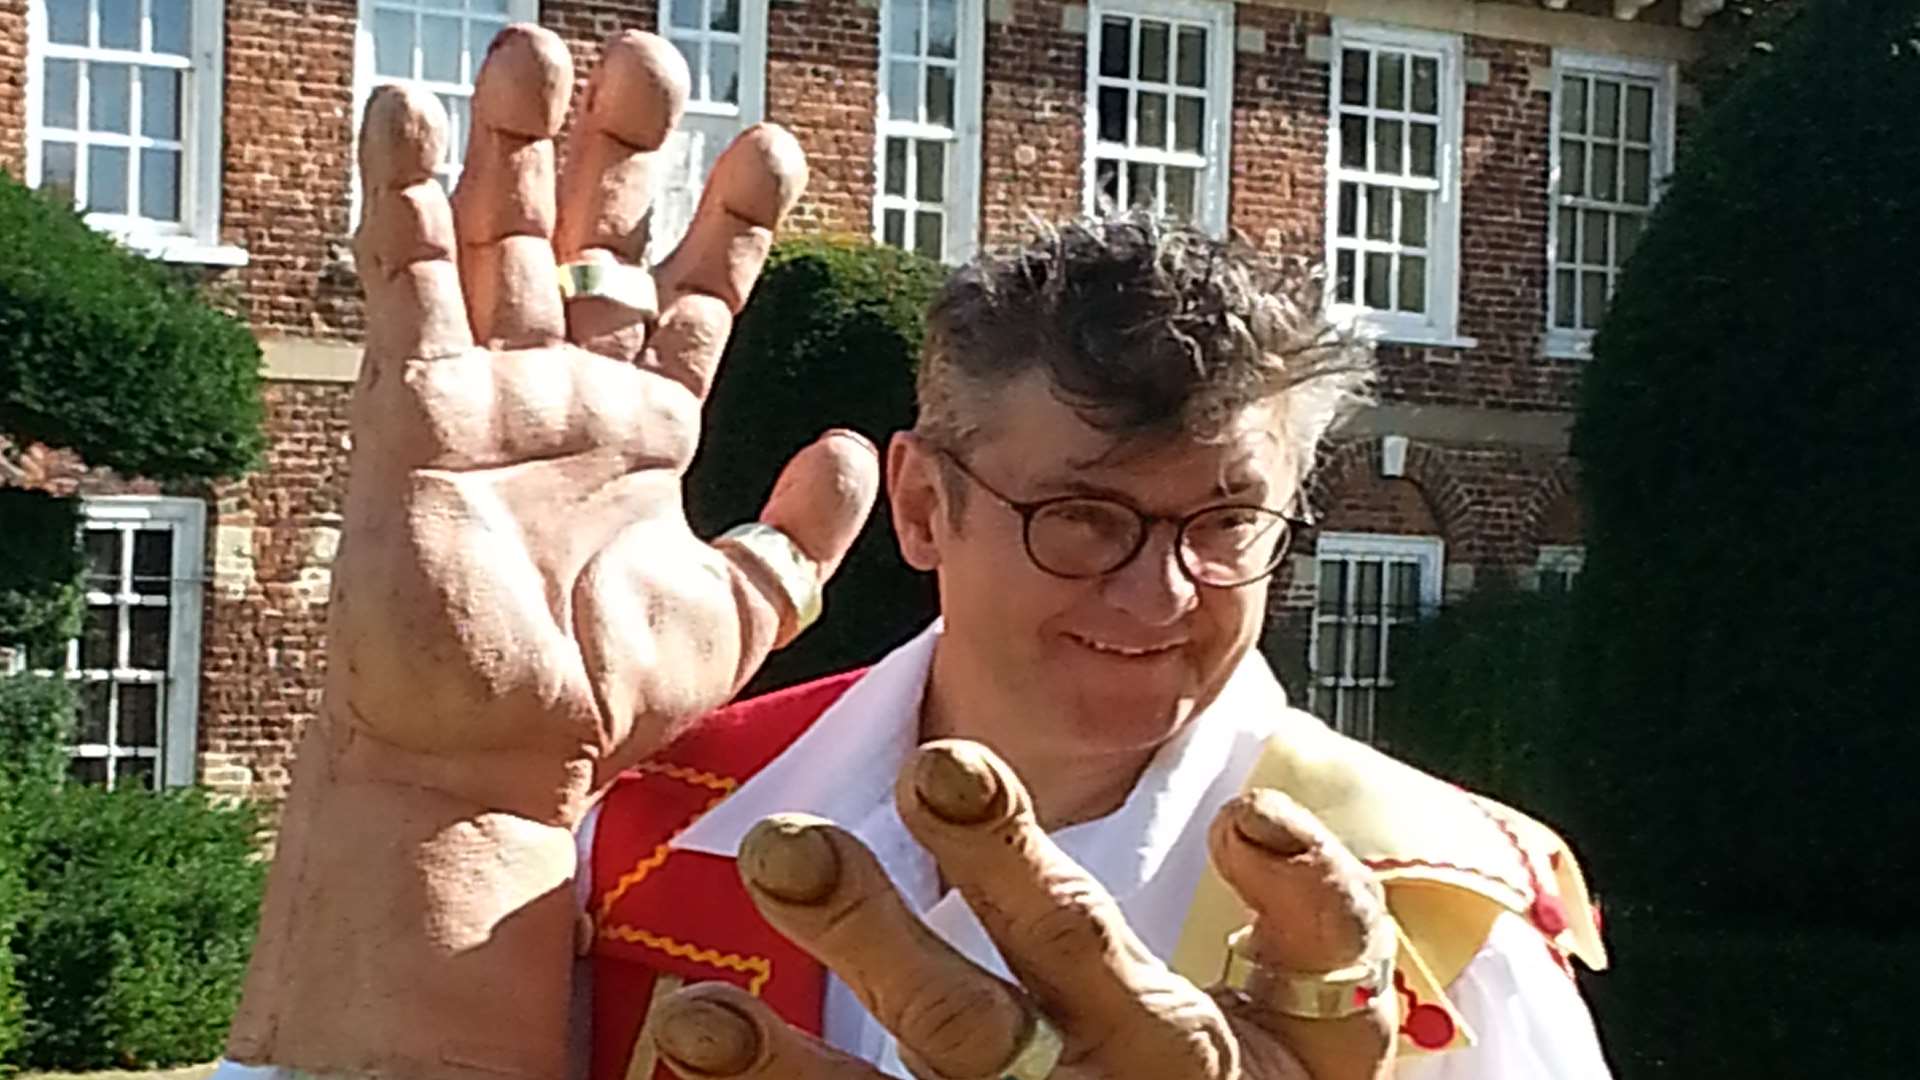 Joe Pasquale at the launch of the Orchard Theatre's panto, Snow White and the Seven Dwarfs